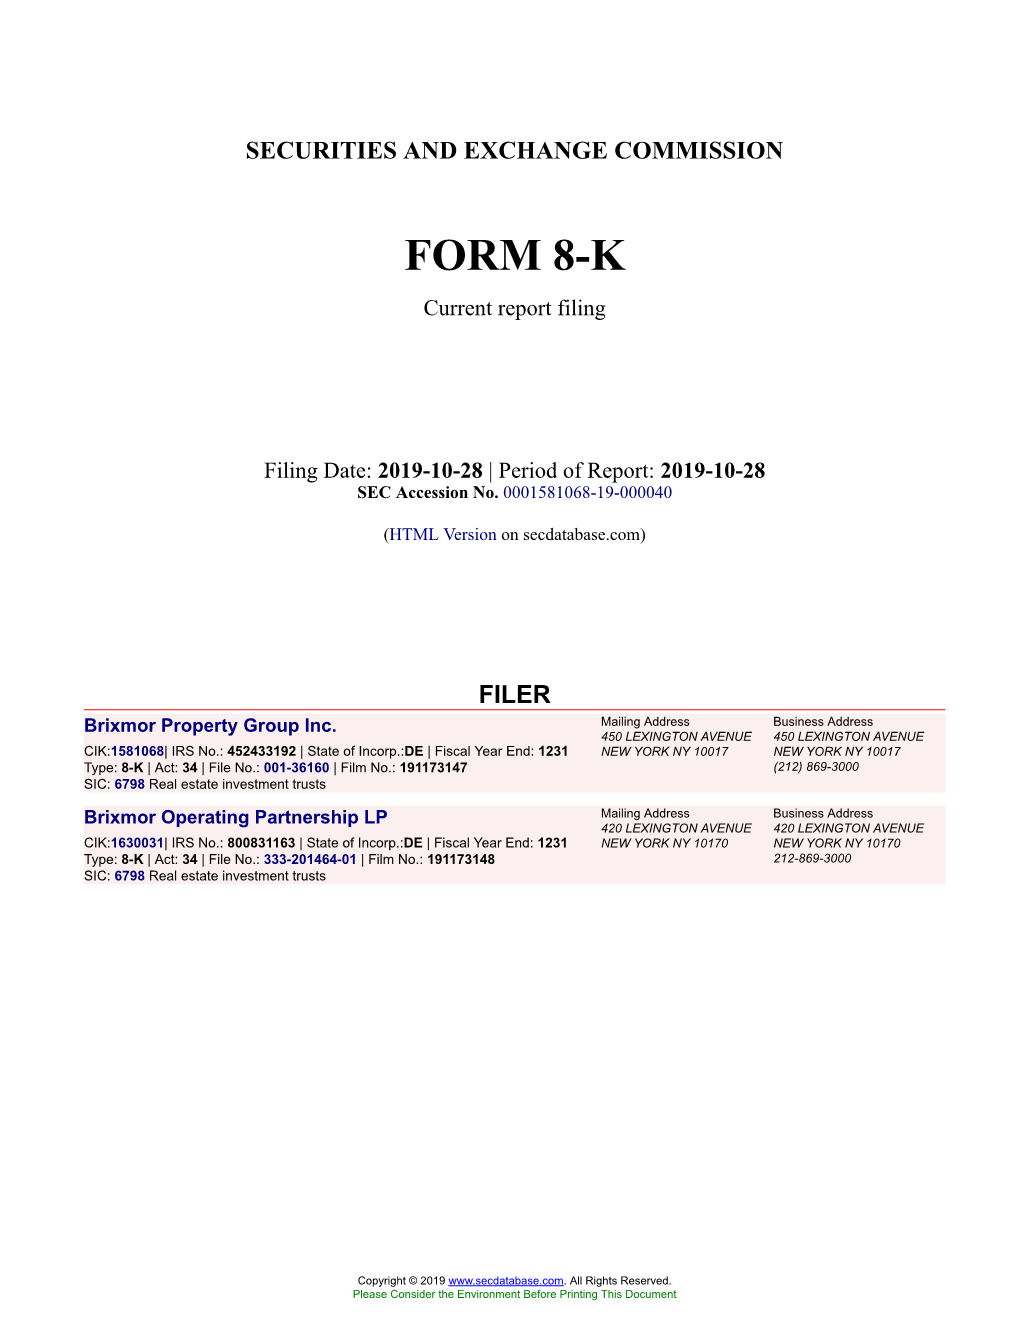 Brixmor Property Group Inc. Form 8-K Current Event Report Filed 2019-10